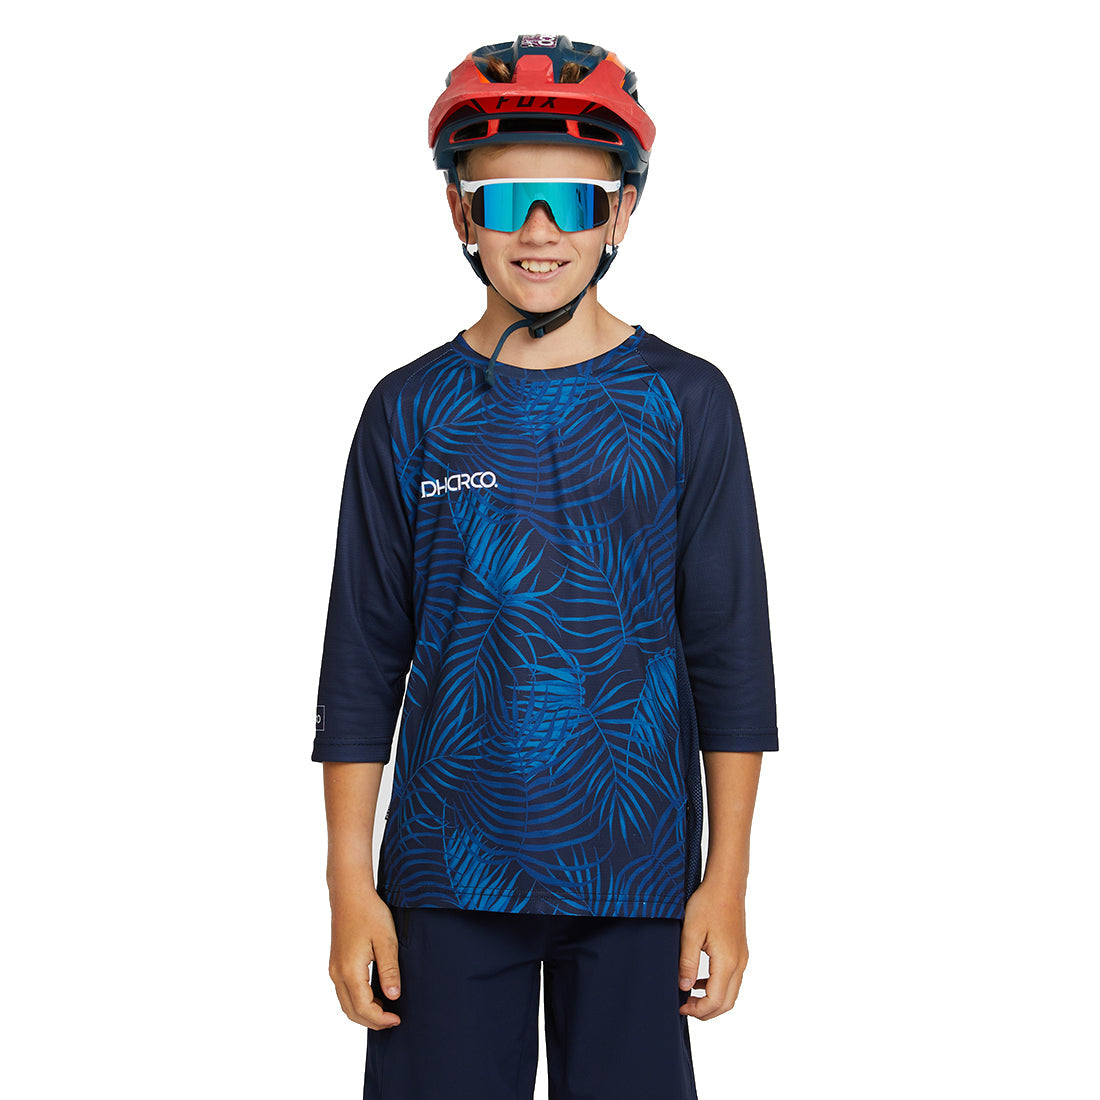 Dharco Youth Tops - MTB Direct Australia